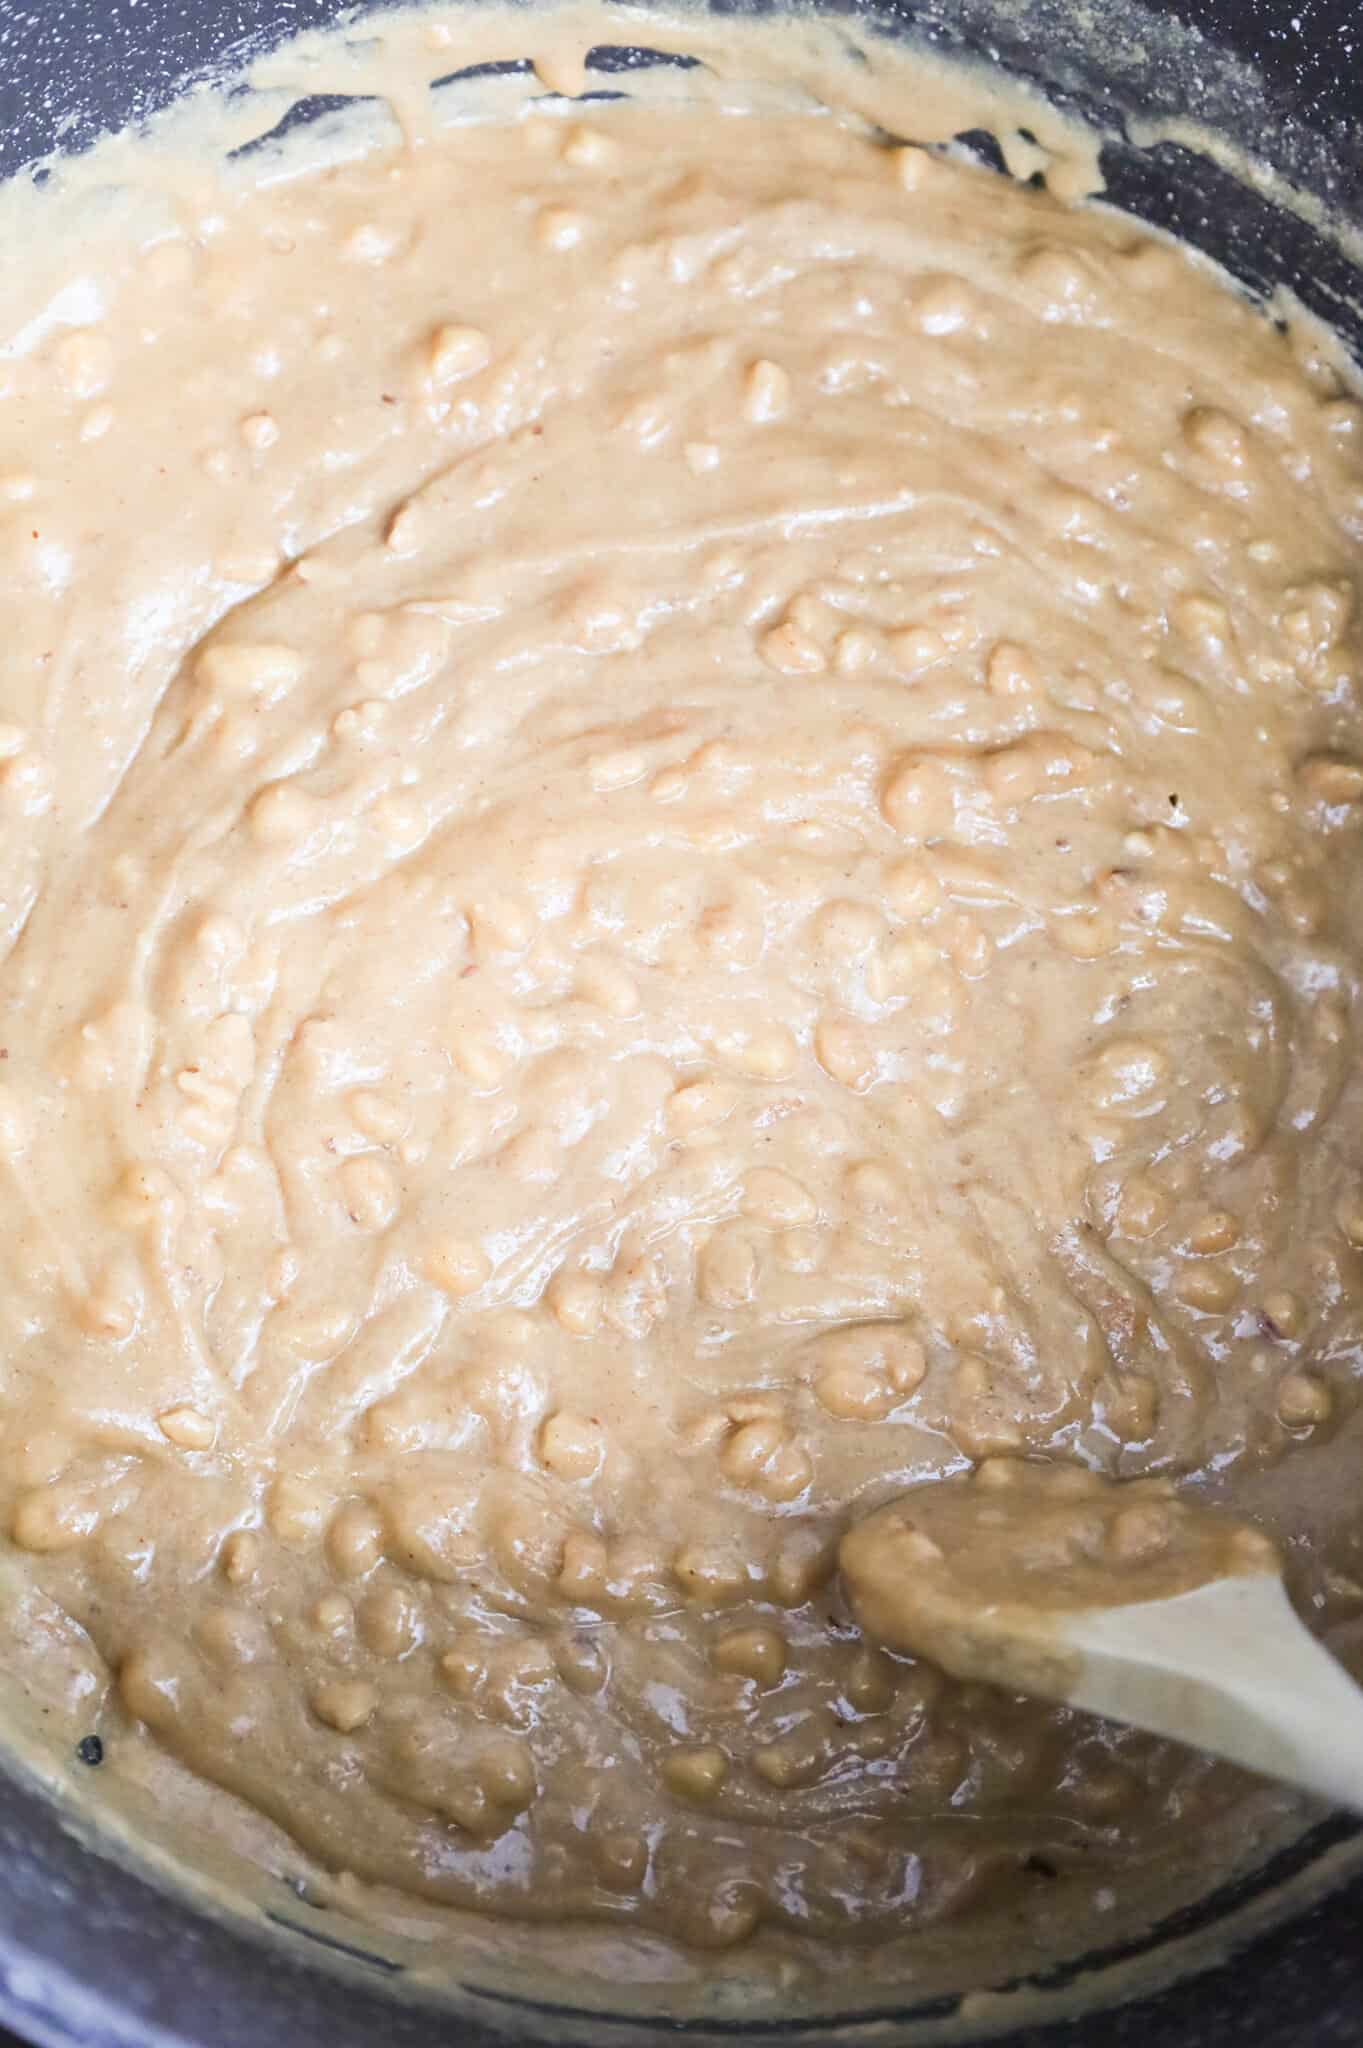 peanut butter, corn syrup and sugar bubbling in a pot